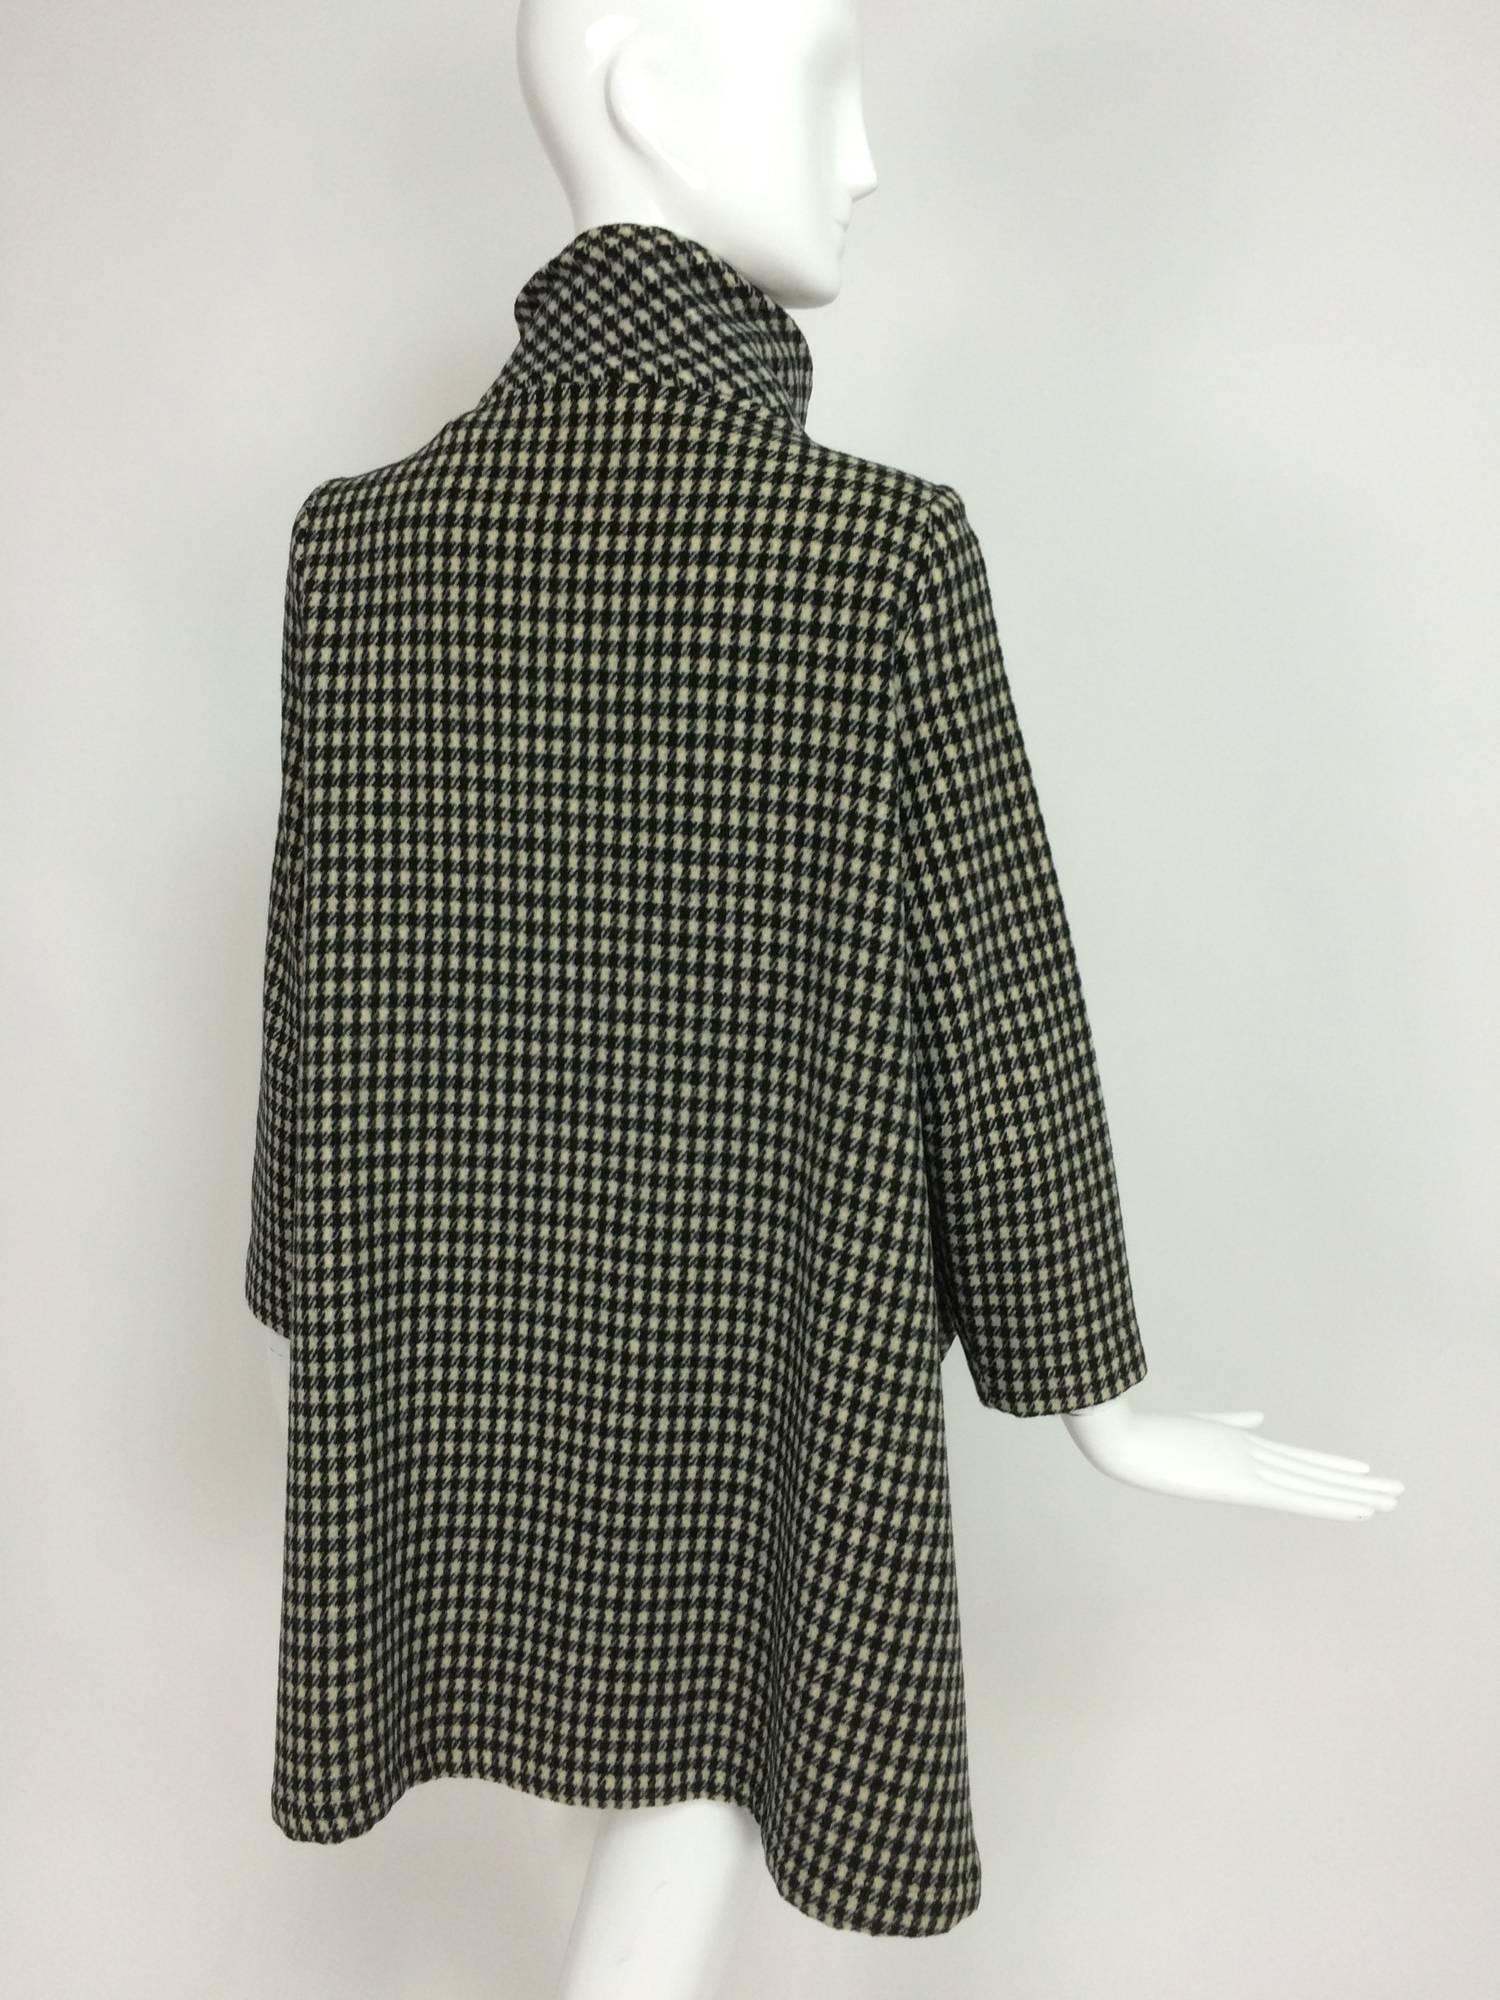 Mod black & white check zip front mini tent coat 1960s Jordan Marsh made in England...So evocative of the mid 1960s, when hems were really short and black & white was in...Jordan Marsh was a department store that to earlier generations served as the